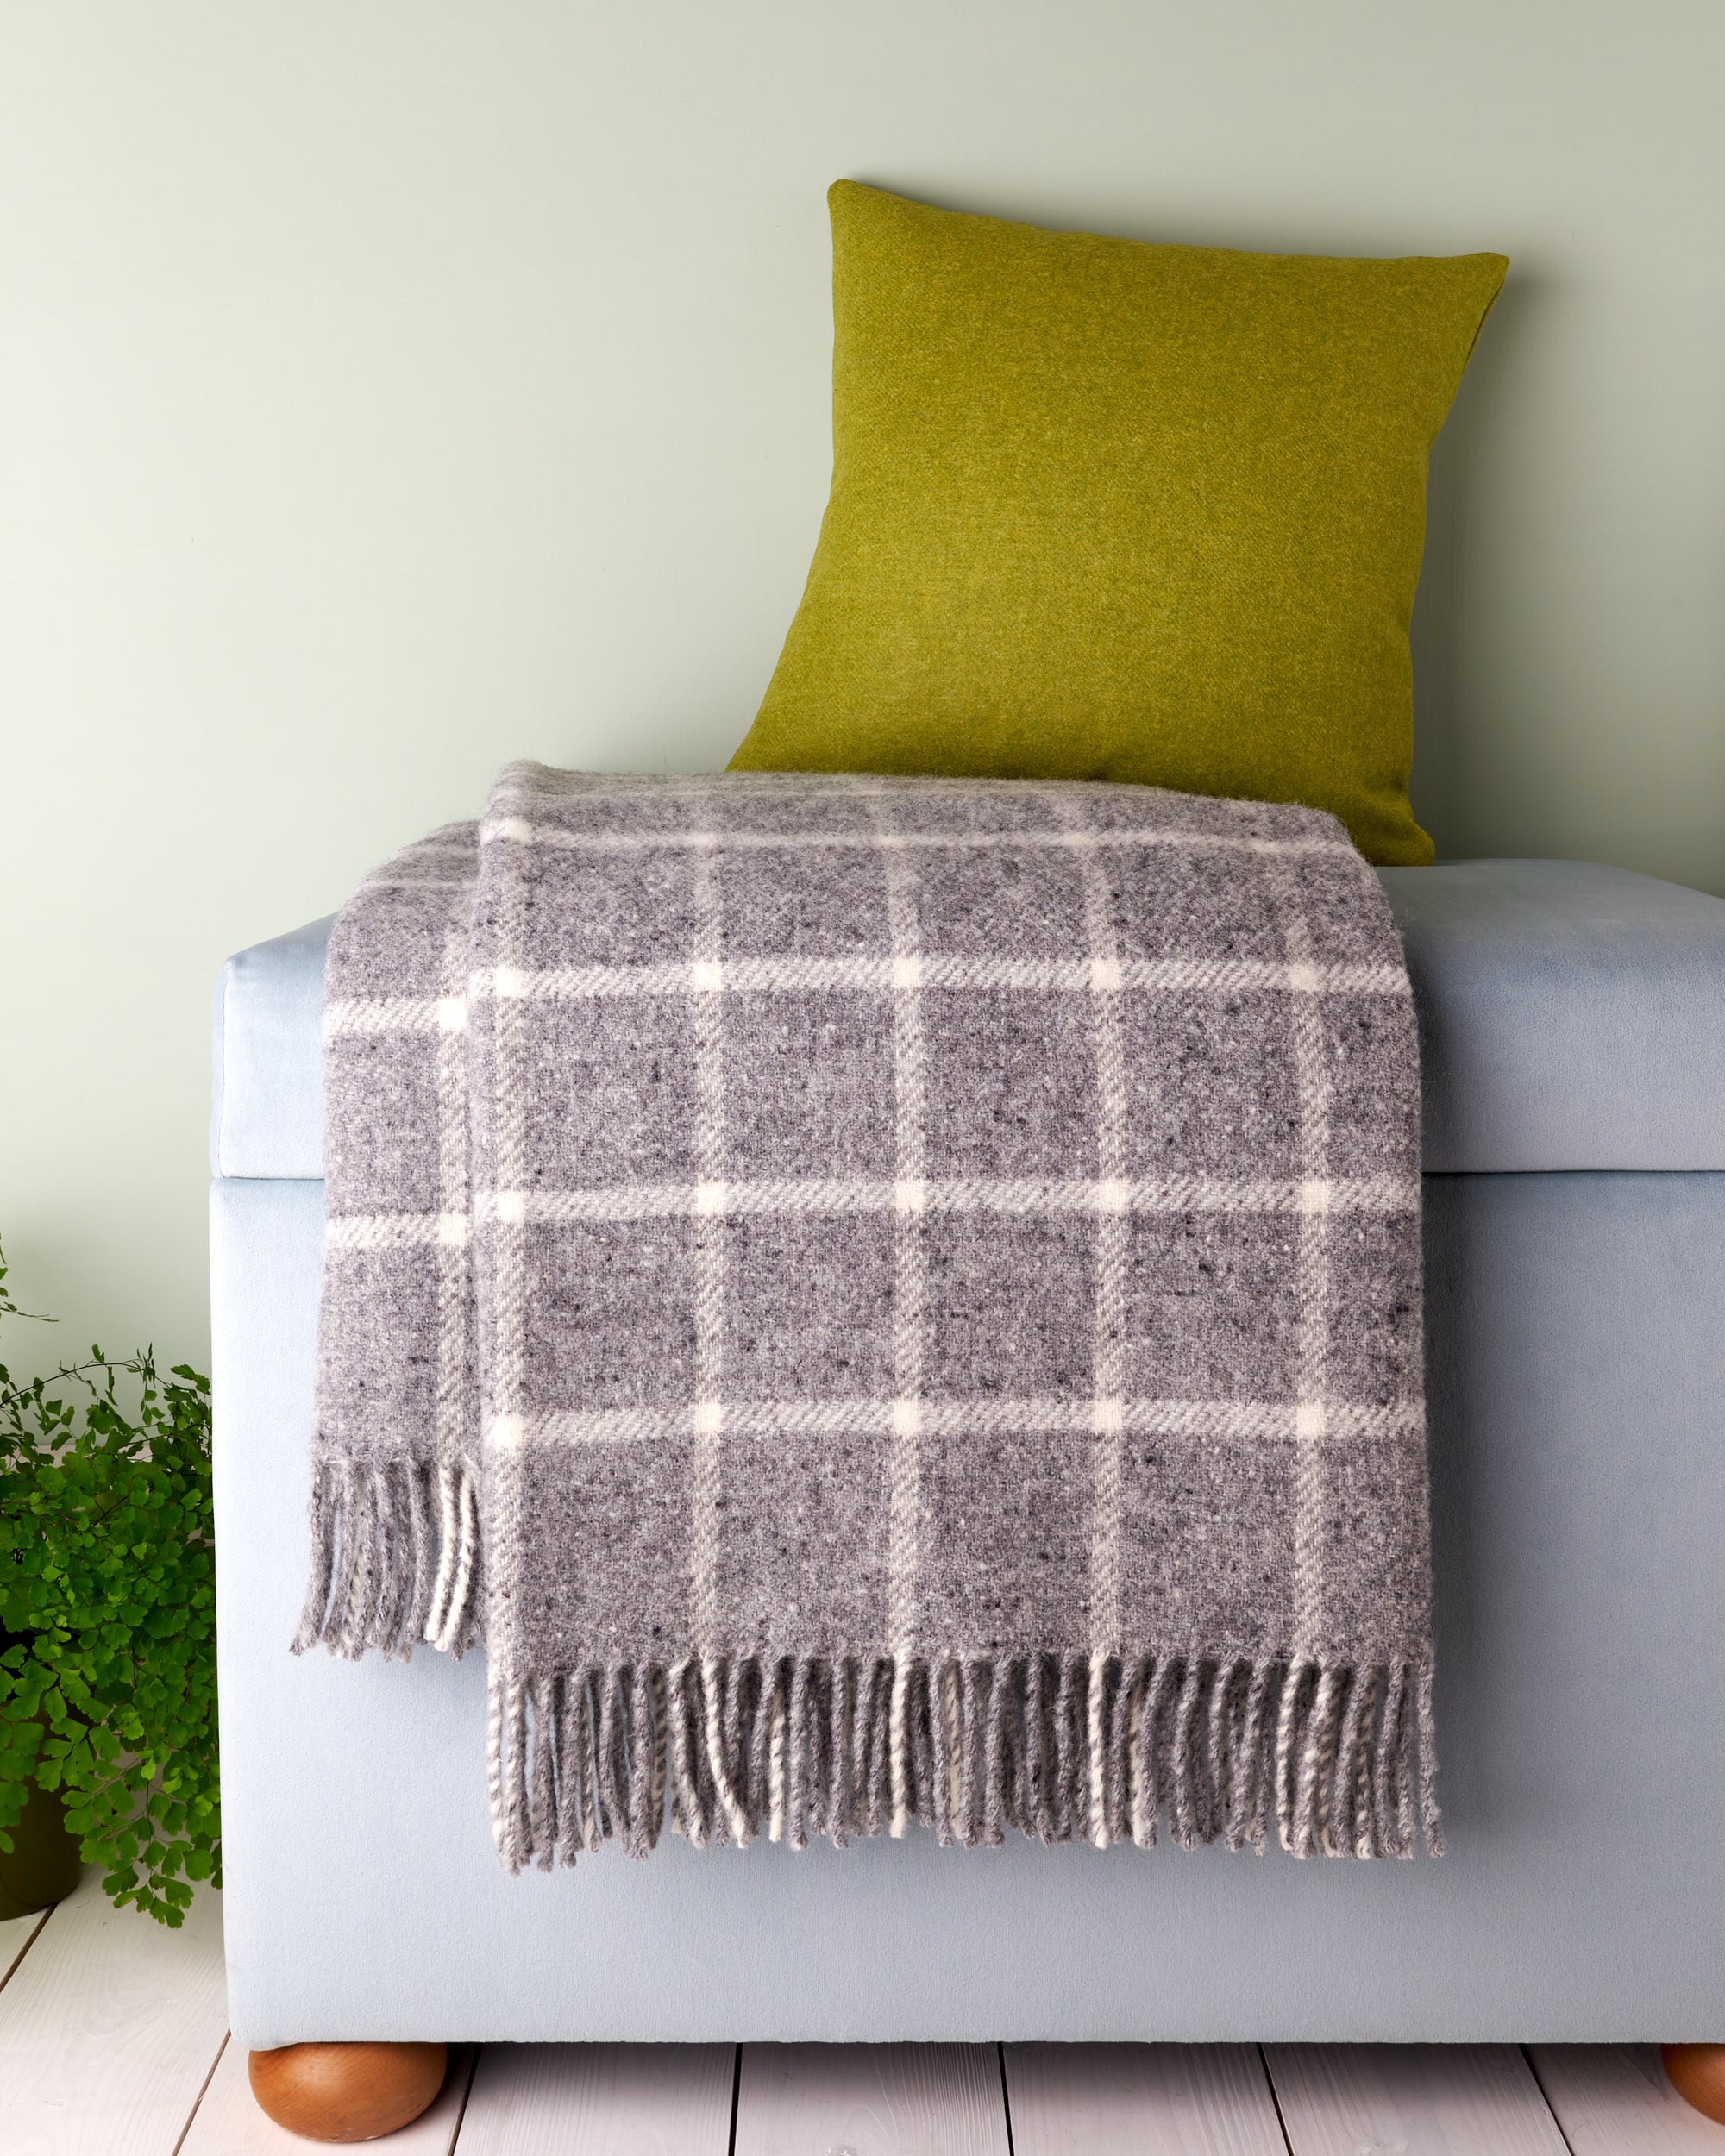 Tweedmill Chequered Check Grey Wool Blanket Throw